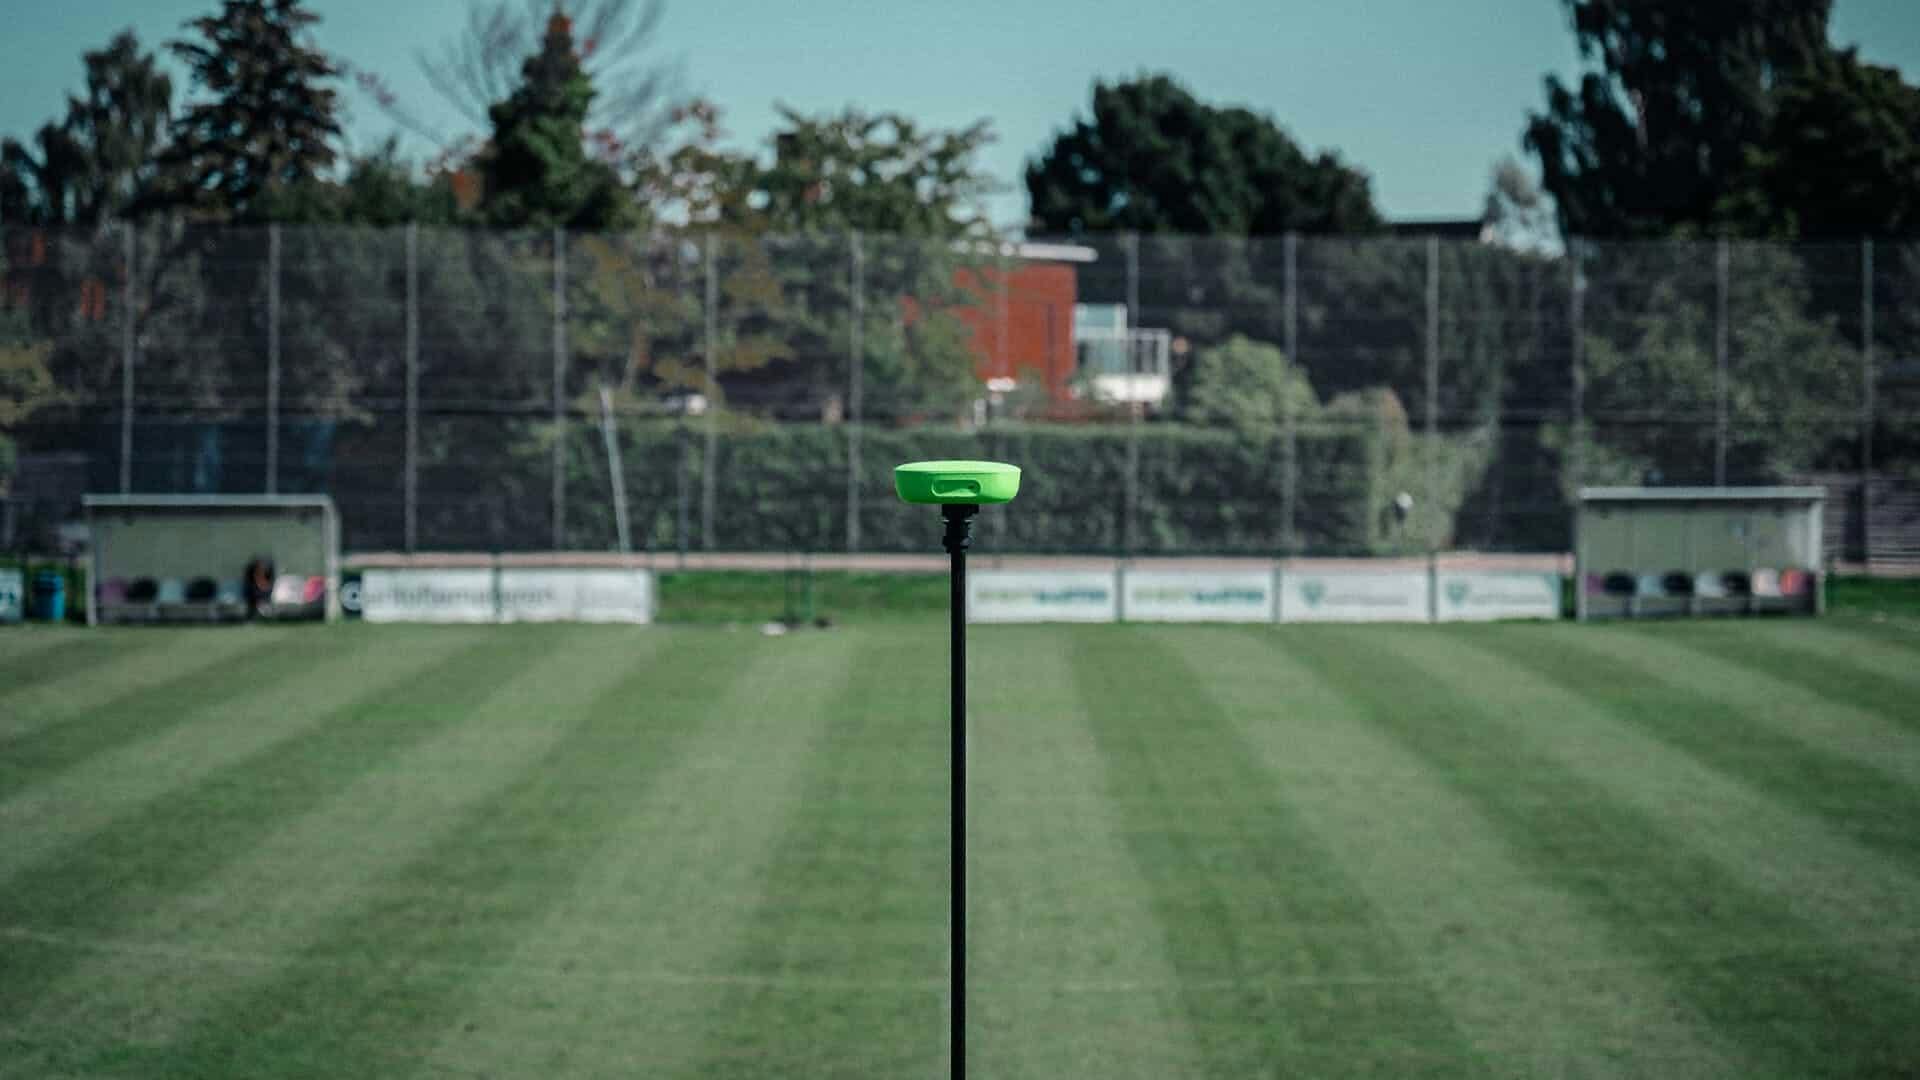 A photo of an empty football field with a tripod and Veo camera mounted on it, showcasing the world's first portable AI sports camera